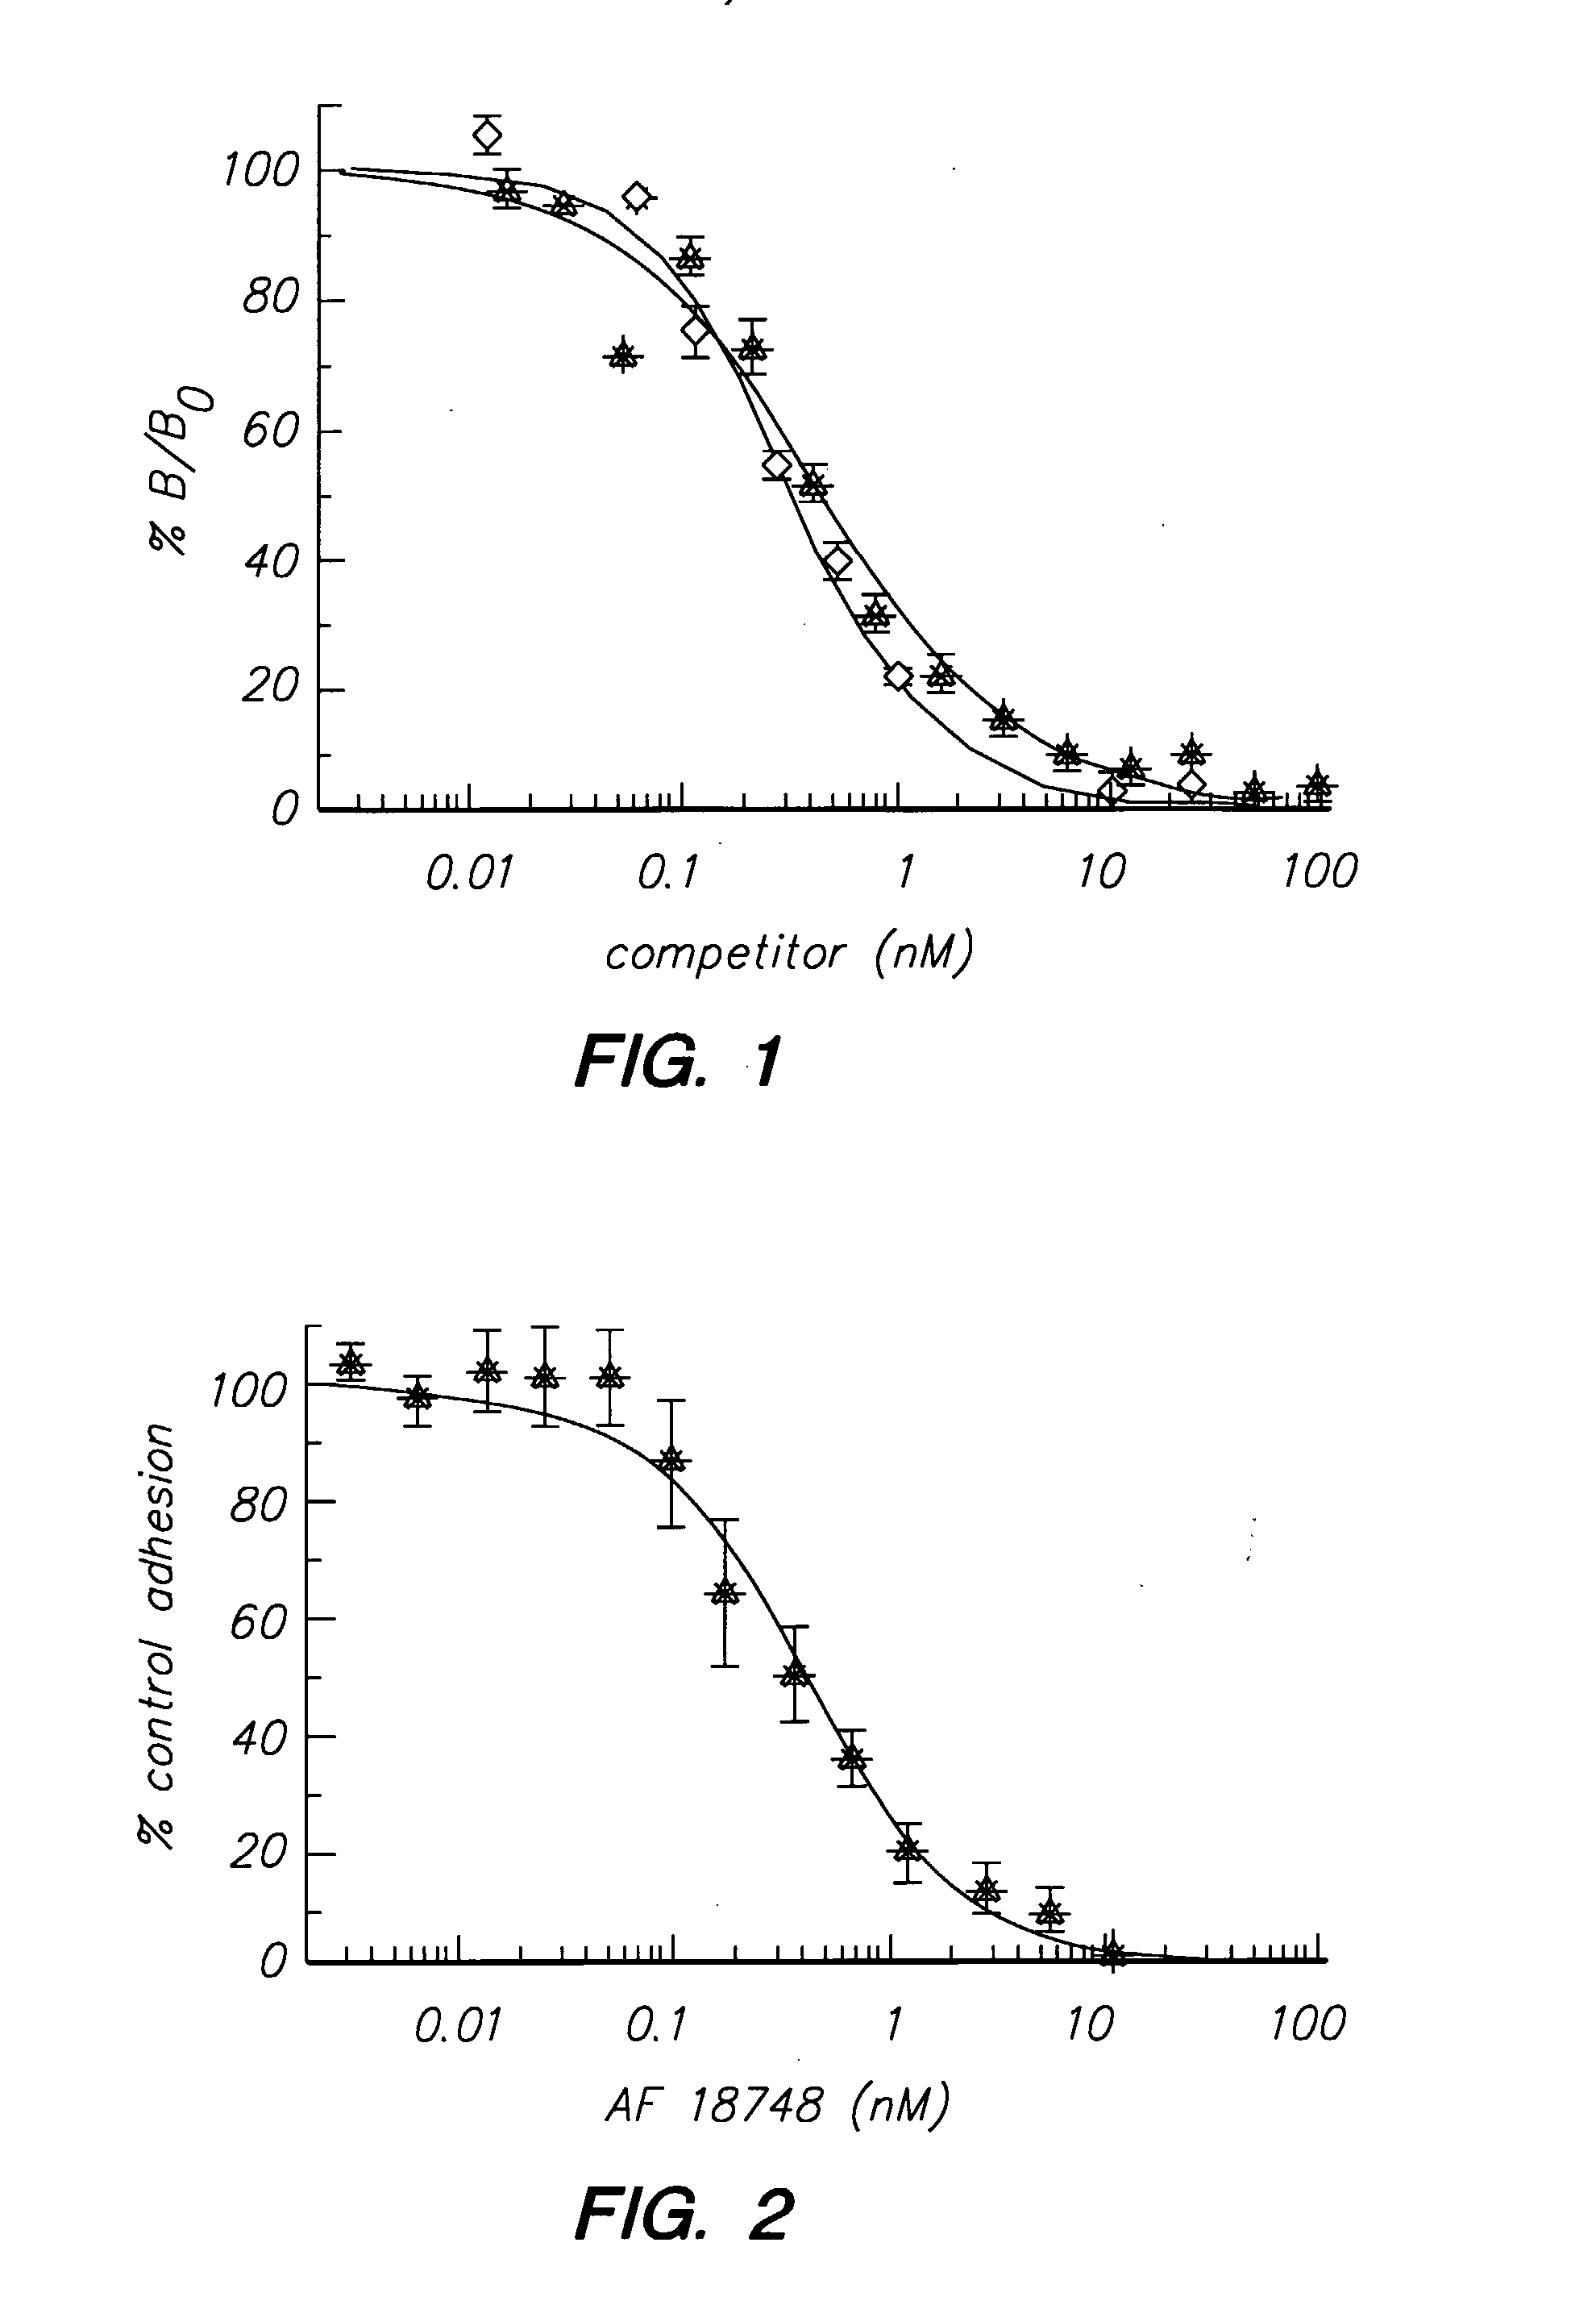 Peptides and compounds that bind to the il-5 receptor